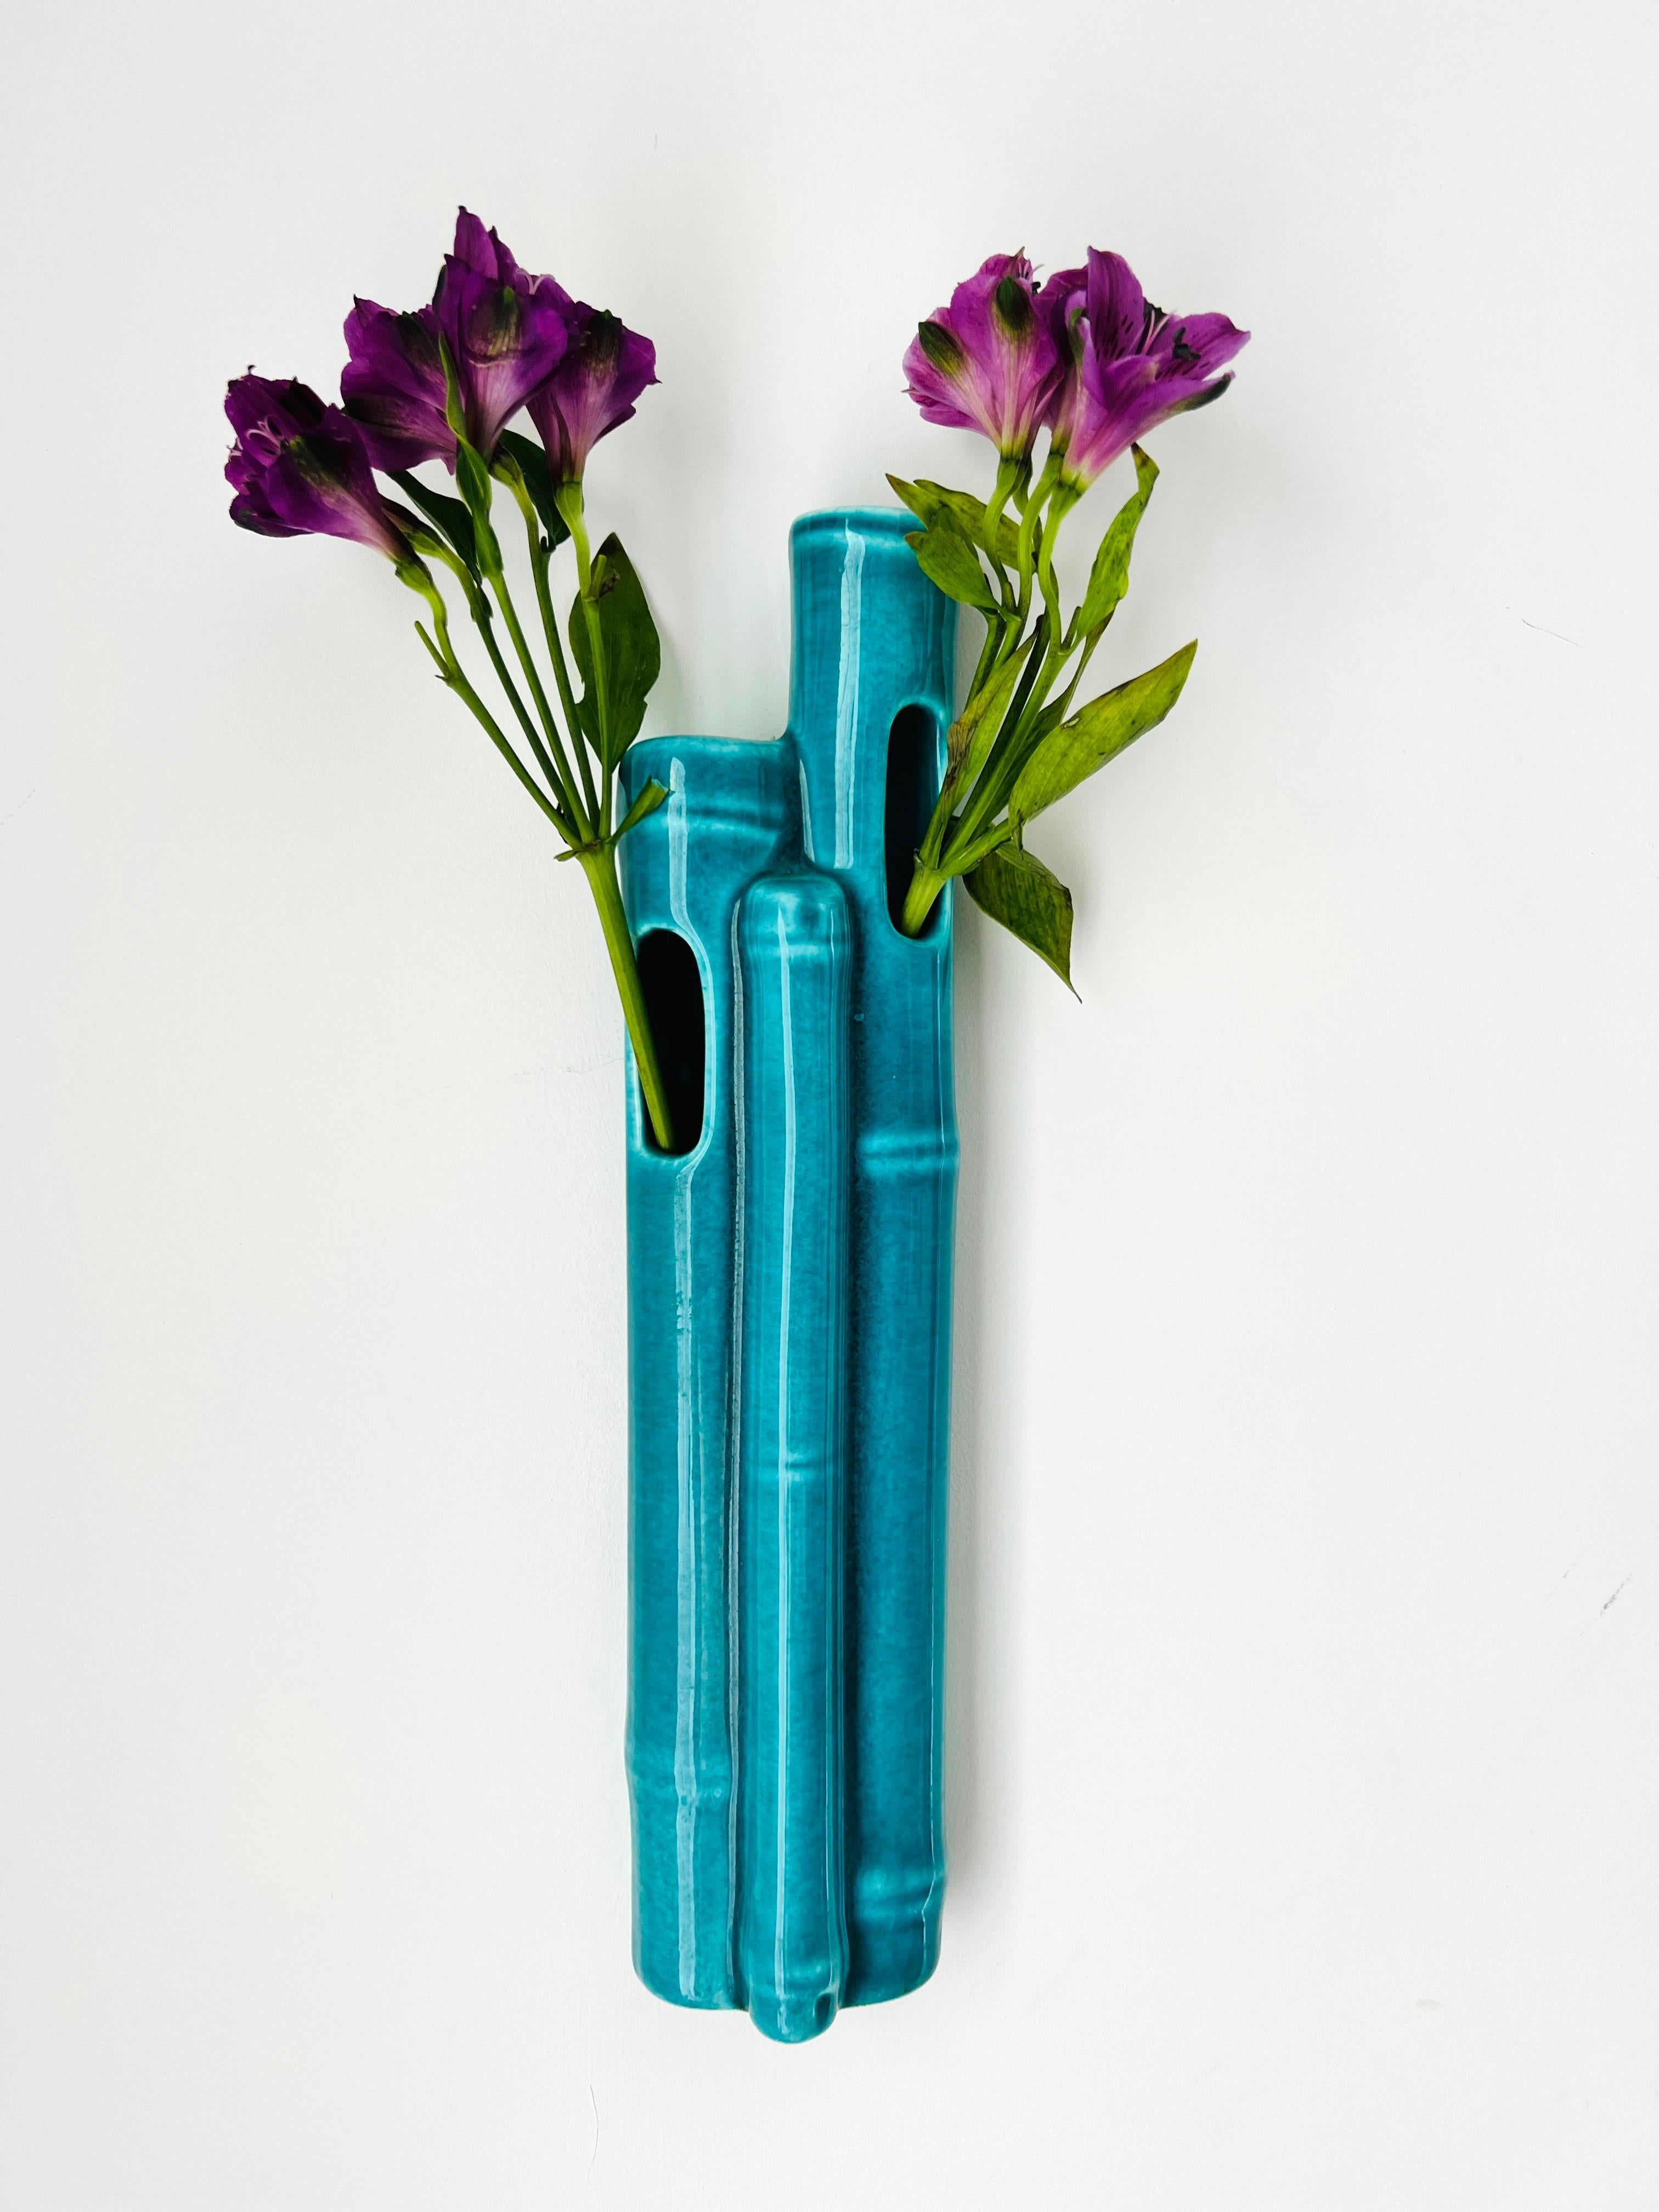 Mid-Century Modern wall pocket vase with bamboo cluster design. Handmade ceramic pottery features a turquoise glaze finish. The vase has one opening along the top and two along the front of the vase.